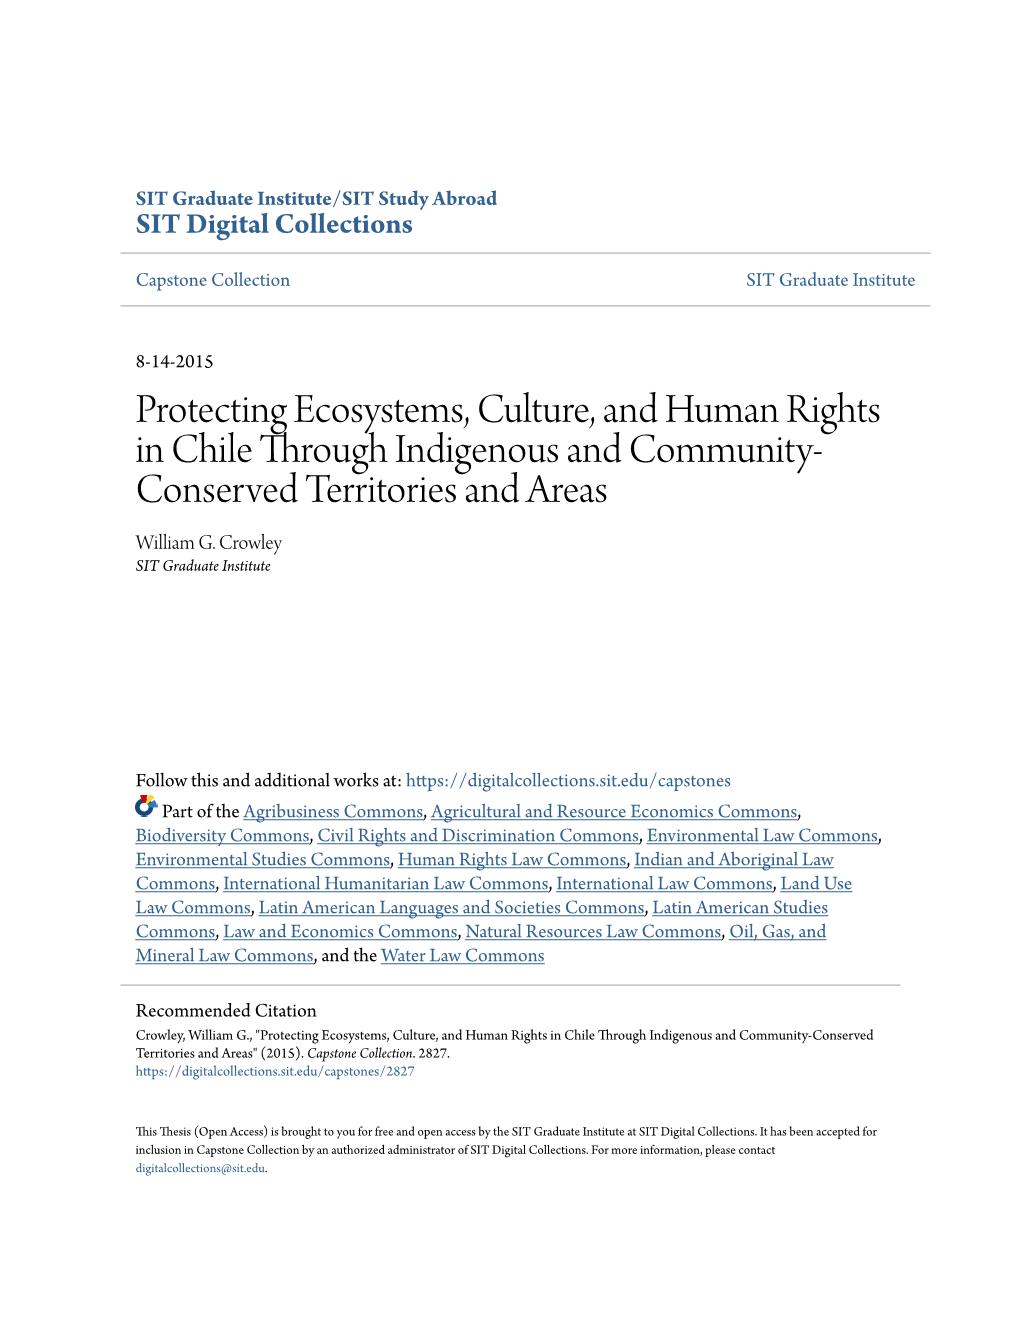 Protecting Ecosystems, Culture, and Human Rights in Chile Through Indigenous and Community- Conserved Territories and Areas William G